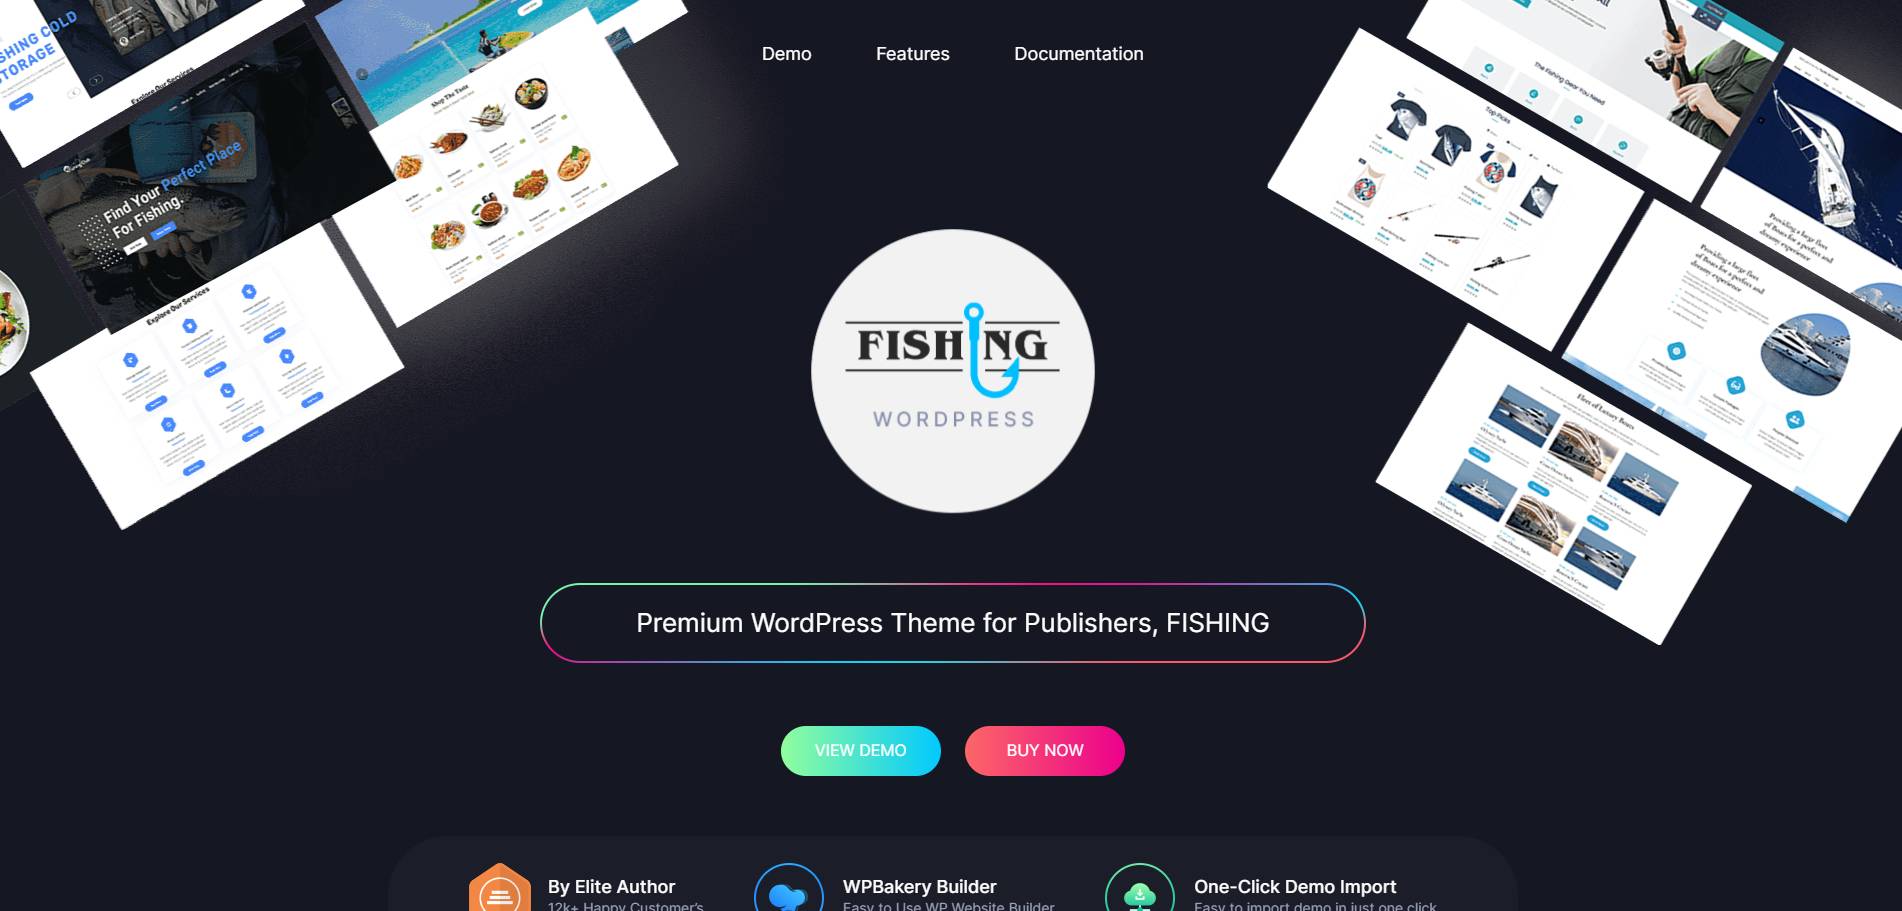 Water Sports, Yacht & Fishing Equipment Store Theme With AI Content